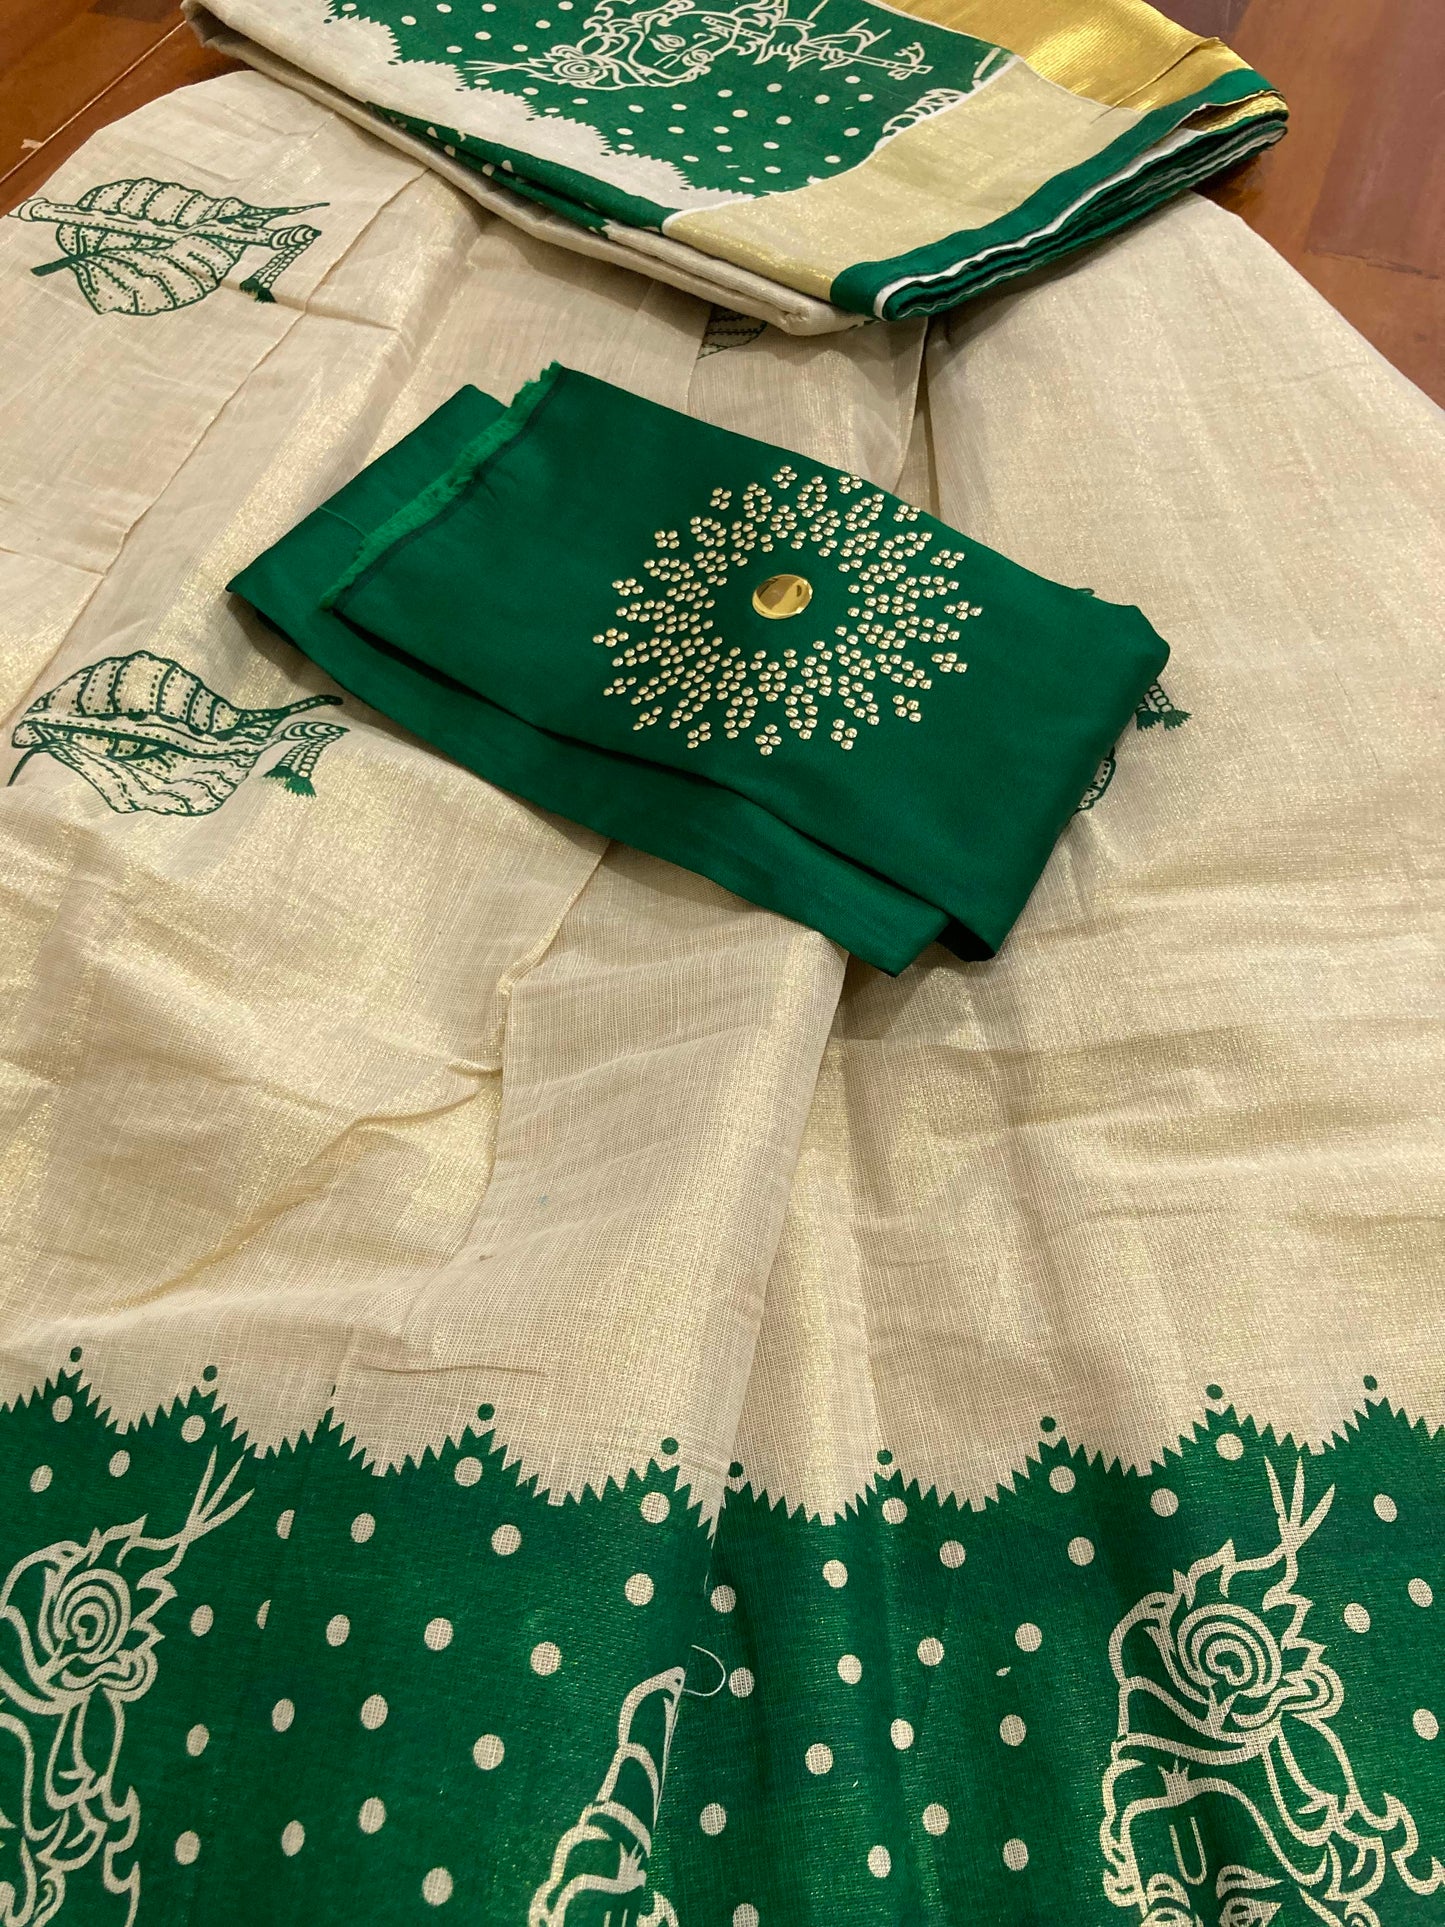 Kerala Tissue Stitched Dhavani Set with Blouse Piece and Neriyathu in with Green Accents and Mural Designs